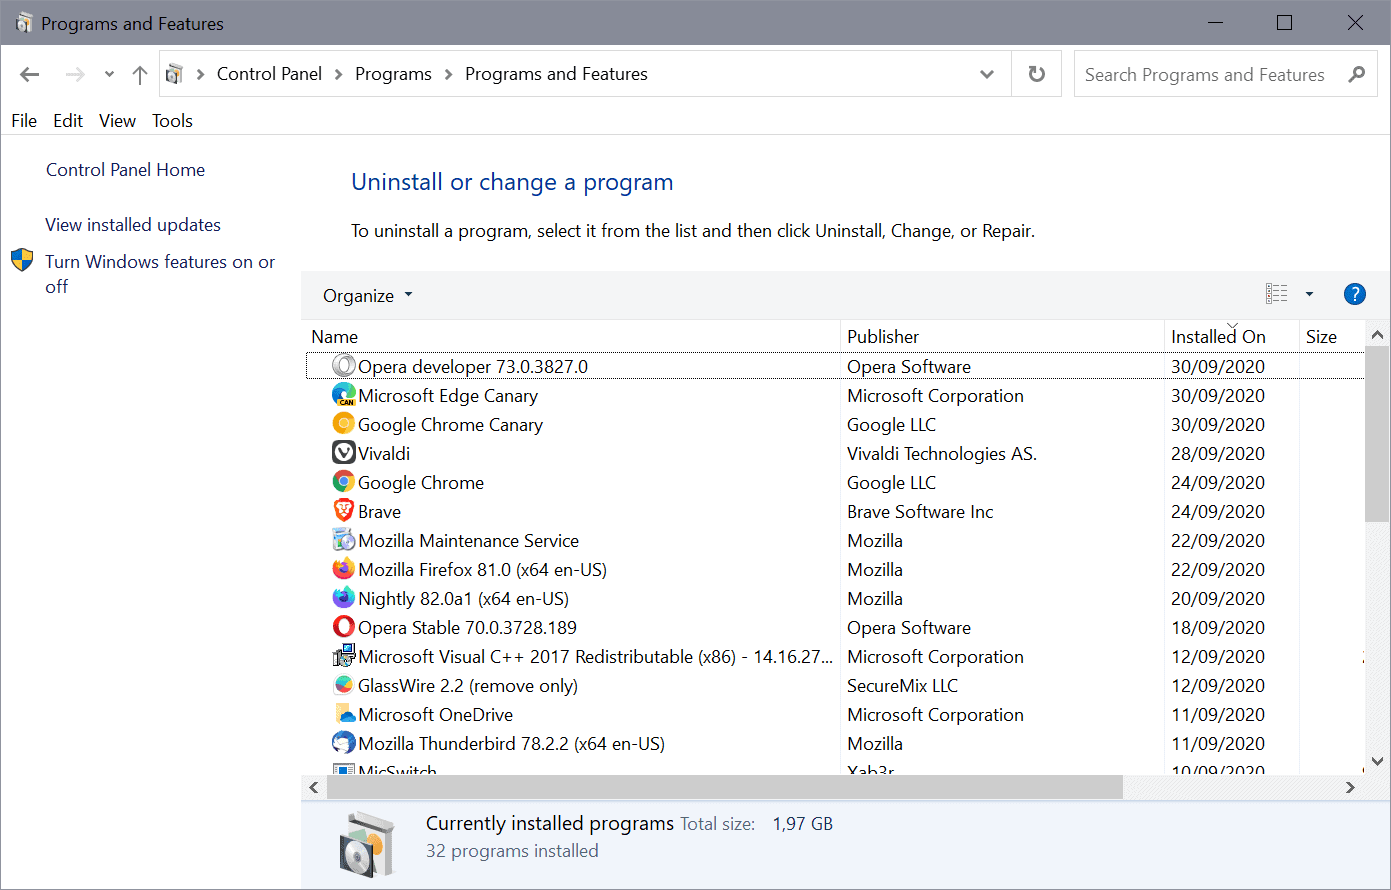 Open Control Panel and go to Programs or Programs and Features.
Uninstall any recently installed programs that may be conflicting with mdres.exe.